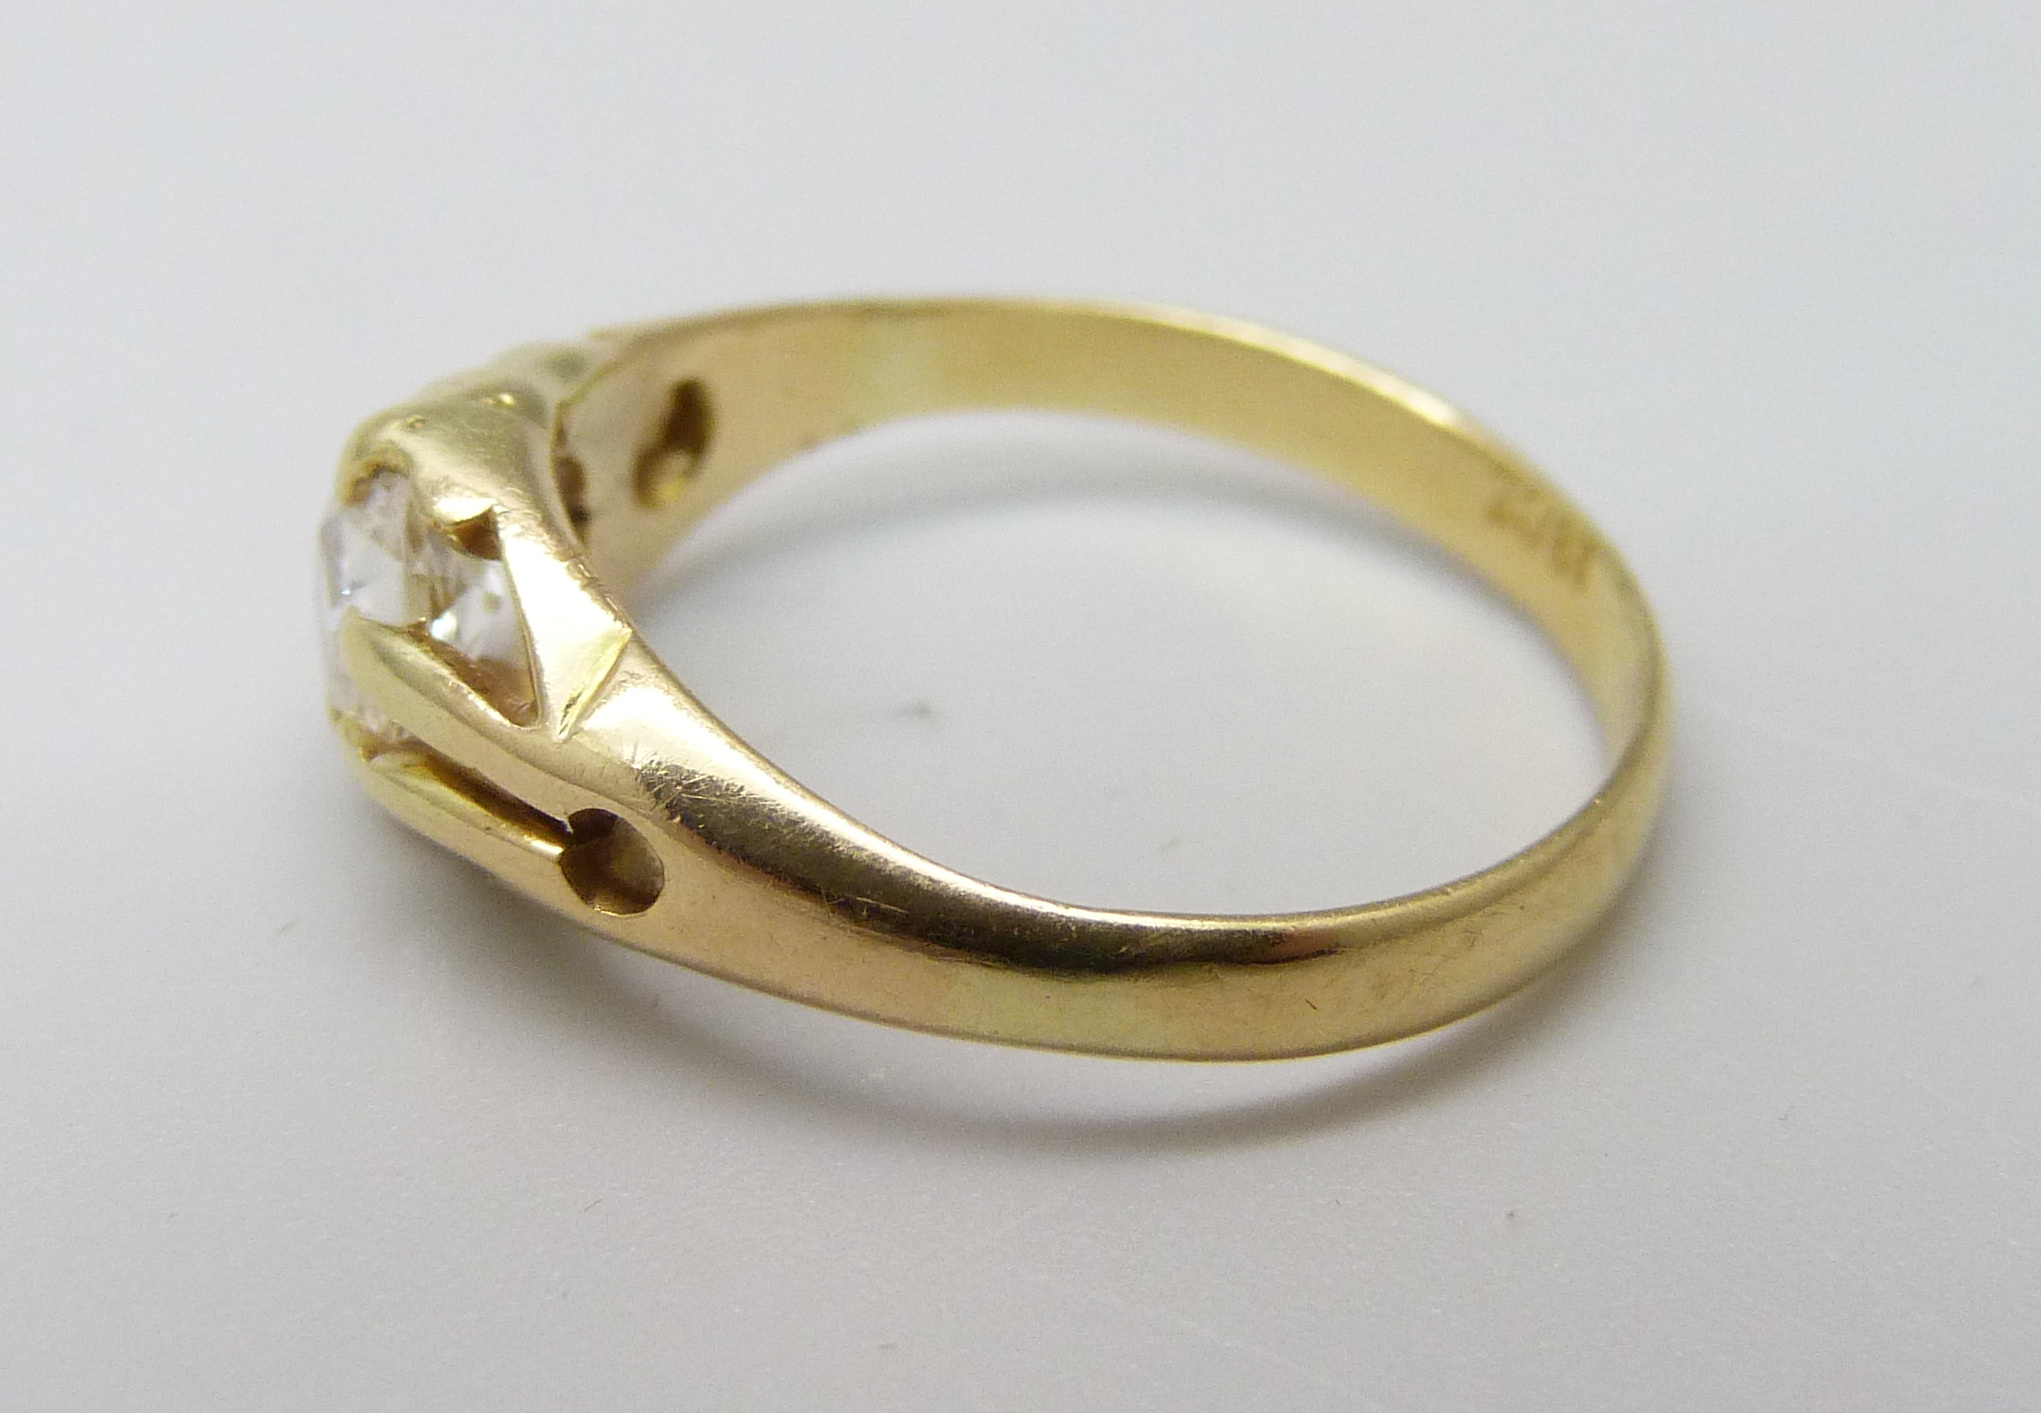 An 18ct gold and diamond solitaire ring, 2.2g, J, approximately 0.5ct diamond weight - Image 2 of 3